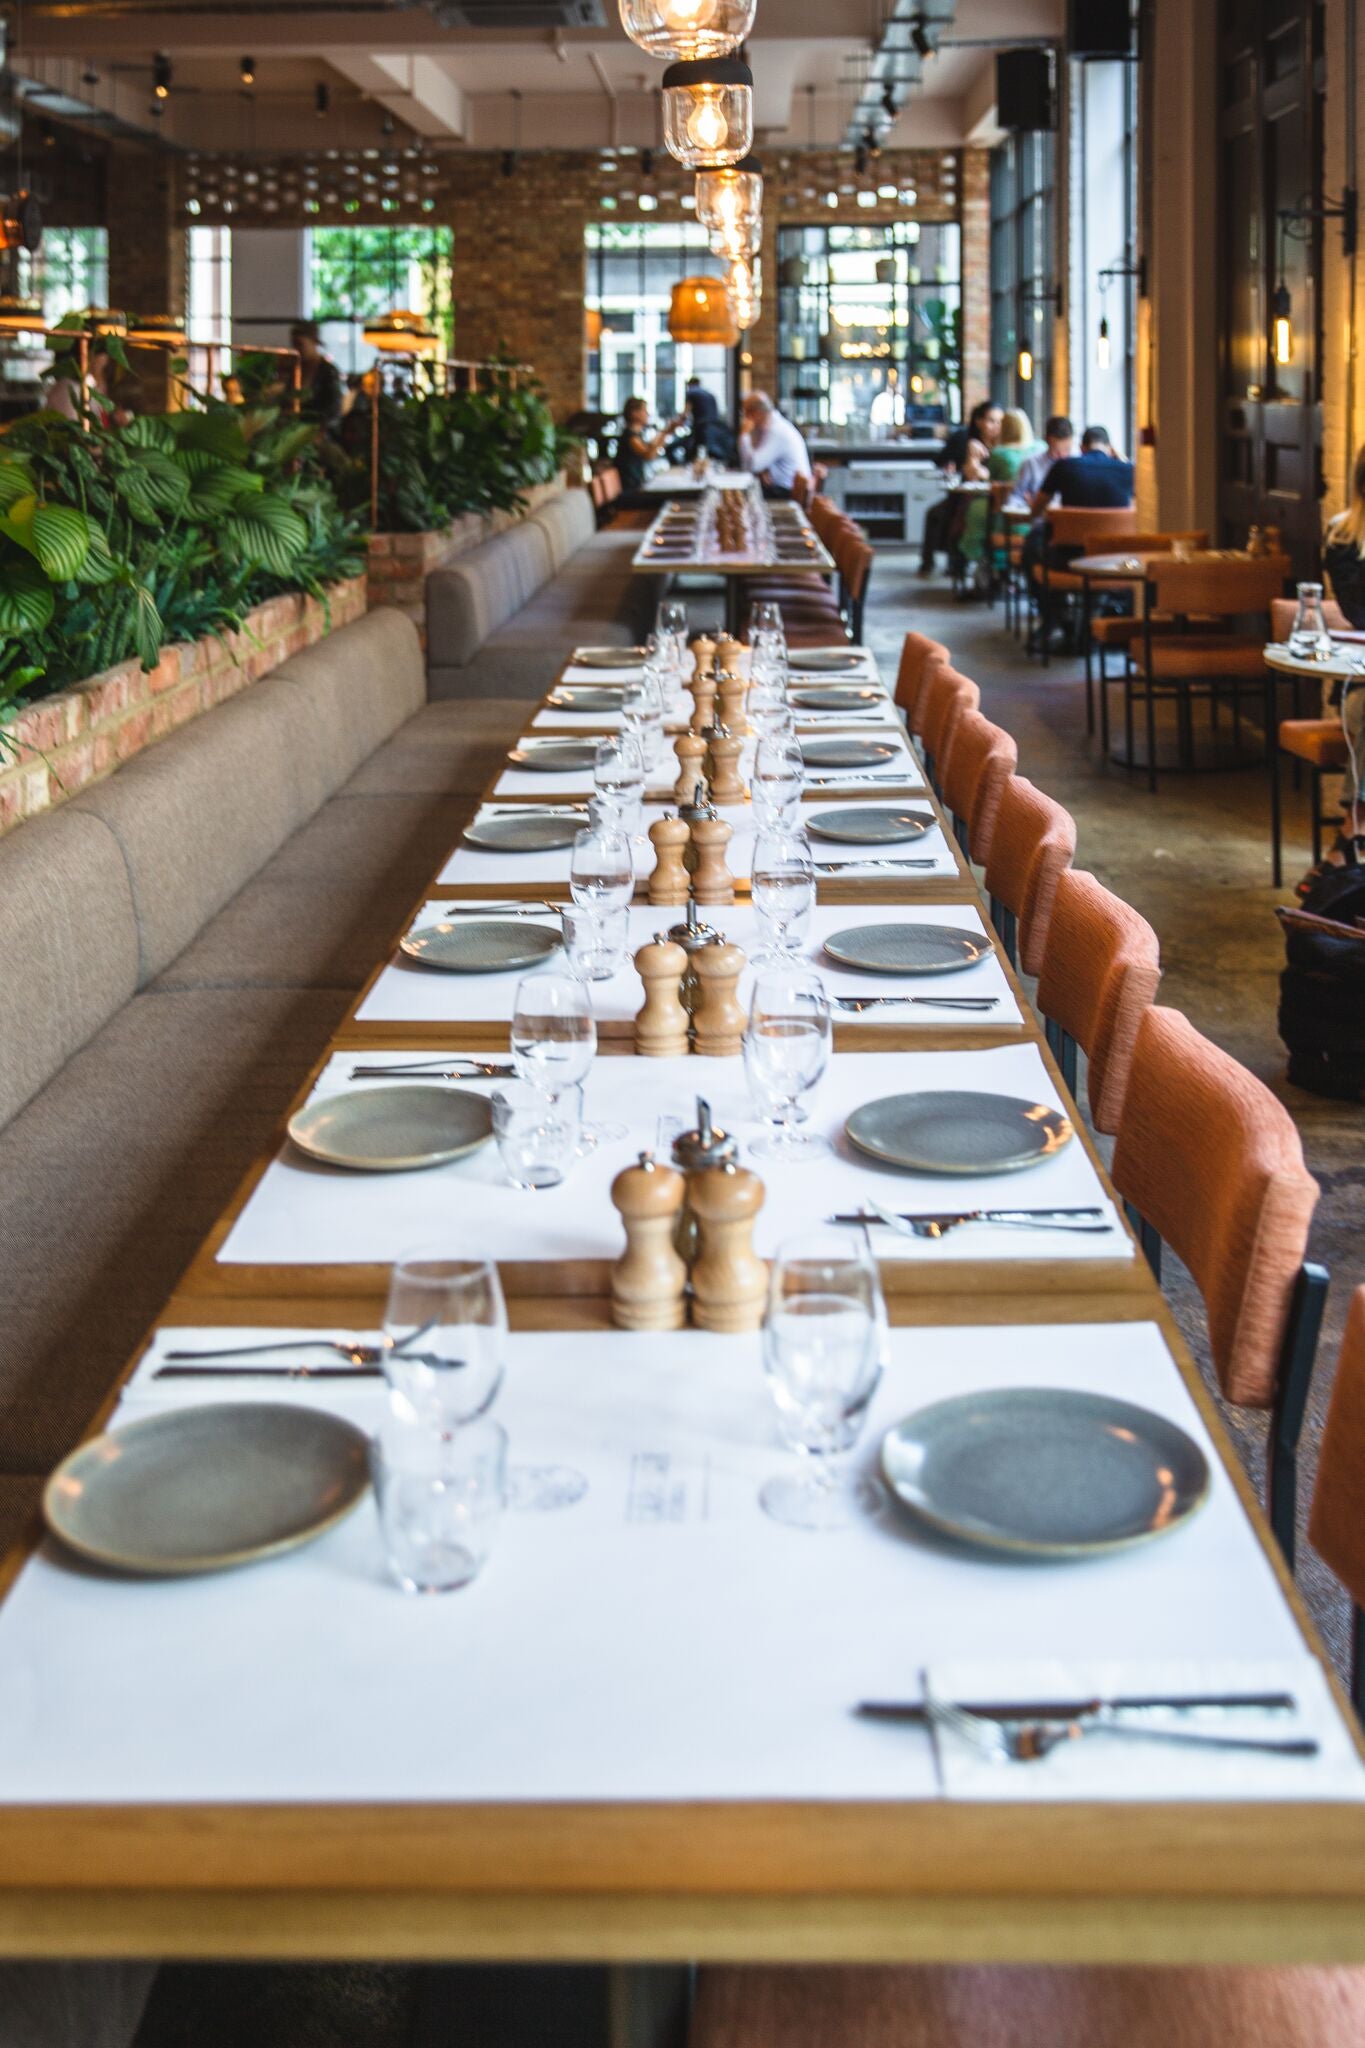 Large dining table for group bookings, corporate events, celebrations and your party at Caravan Fitzrovia restaurant